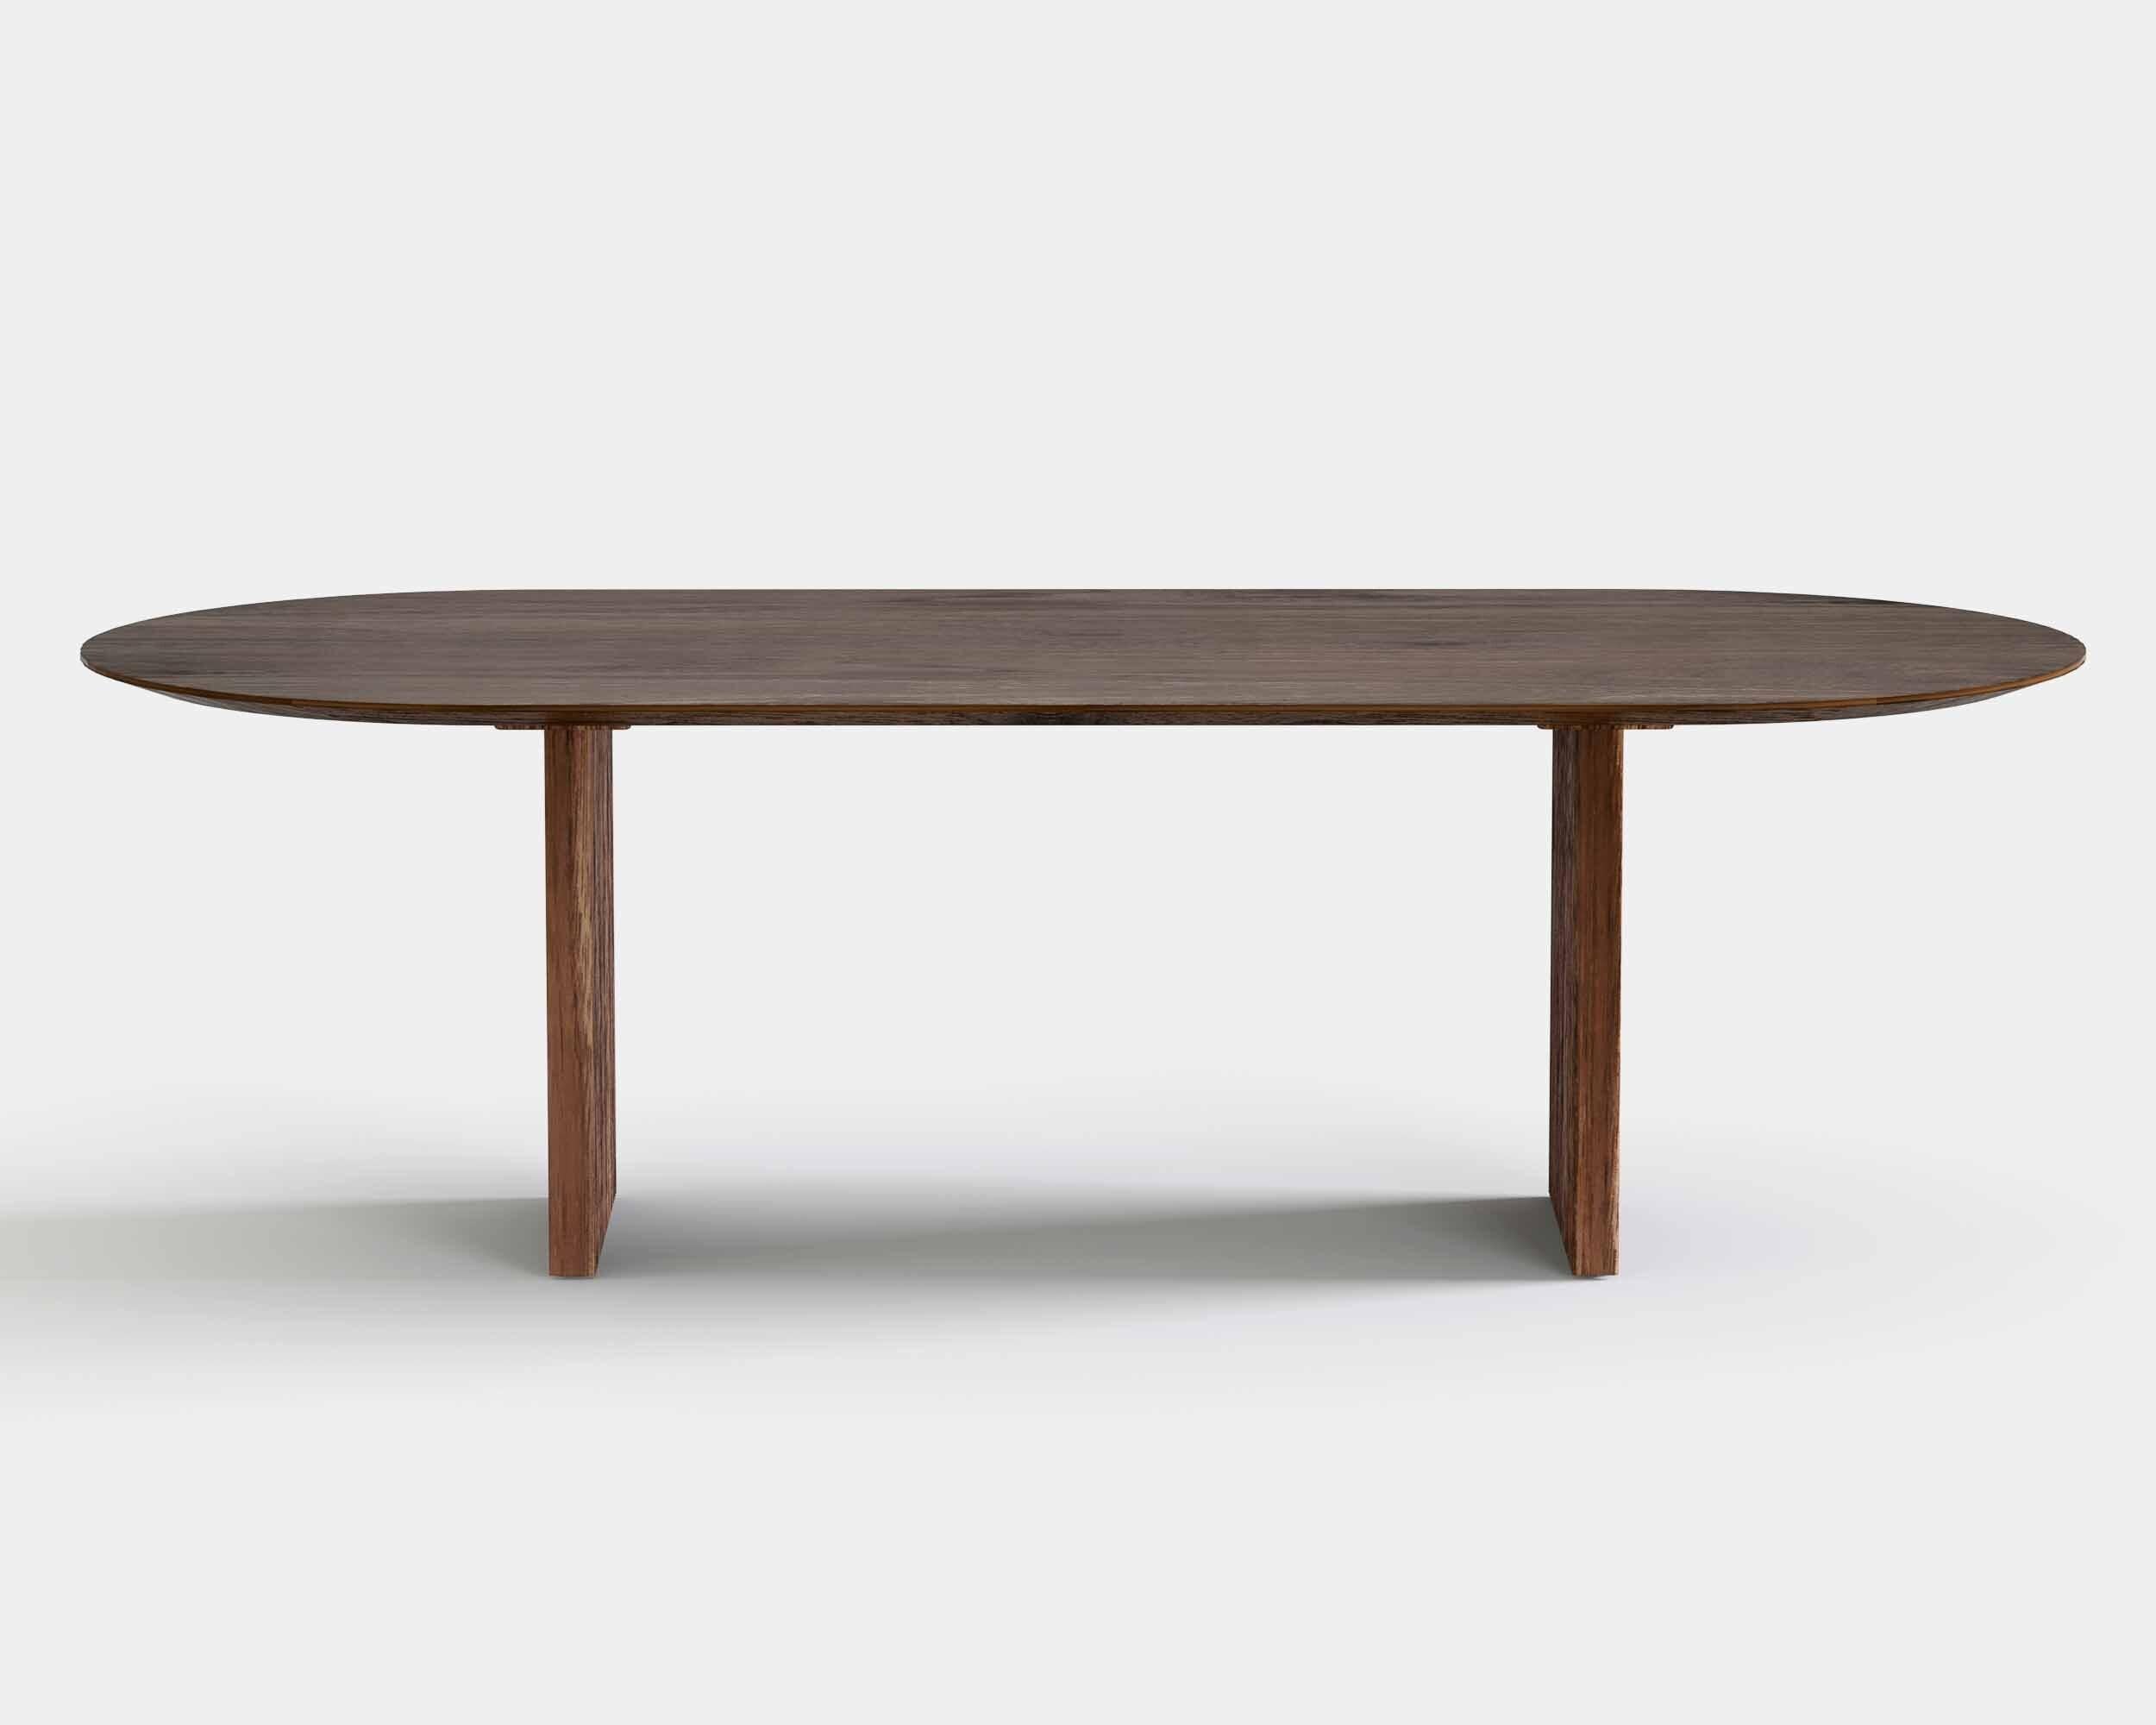 Ten dining table, oval, 240cm.
Solid wood tabletop and legs. Handmade in Denmark. 

Height: 72 or 74 cm

Tabletop dimensions:
– 200 x 95 cm
– 240 x 105 cm
– 270 x 105 cm
– 300 x 105 cm
– 340 x 105 cm
– 370 x 105 cm
– 400 x 105